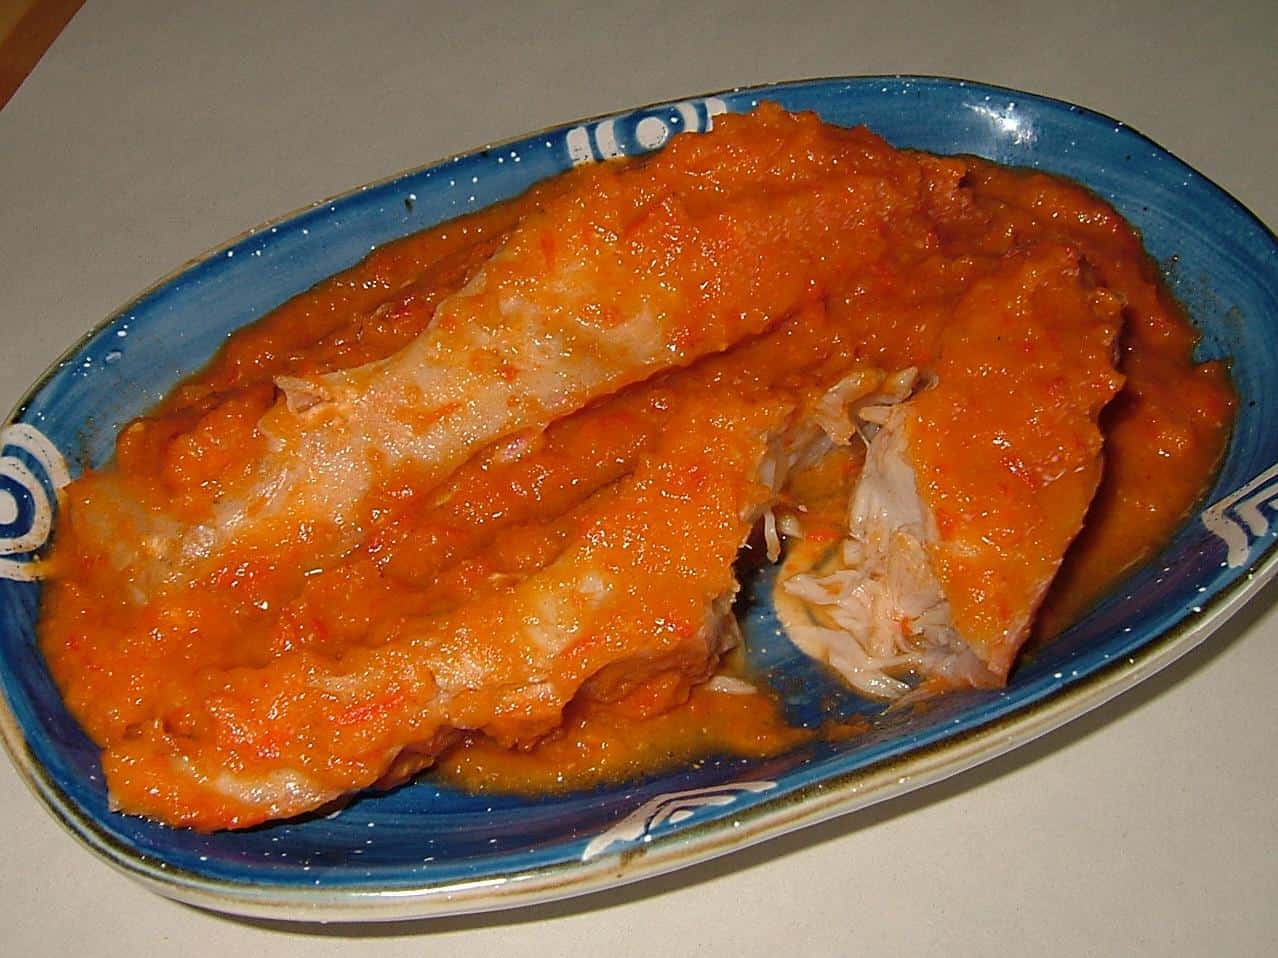 Fish Fillets in Red Pepper Sauce